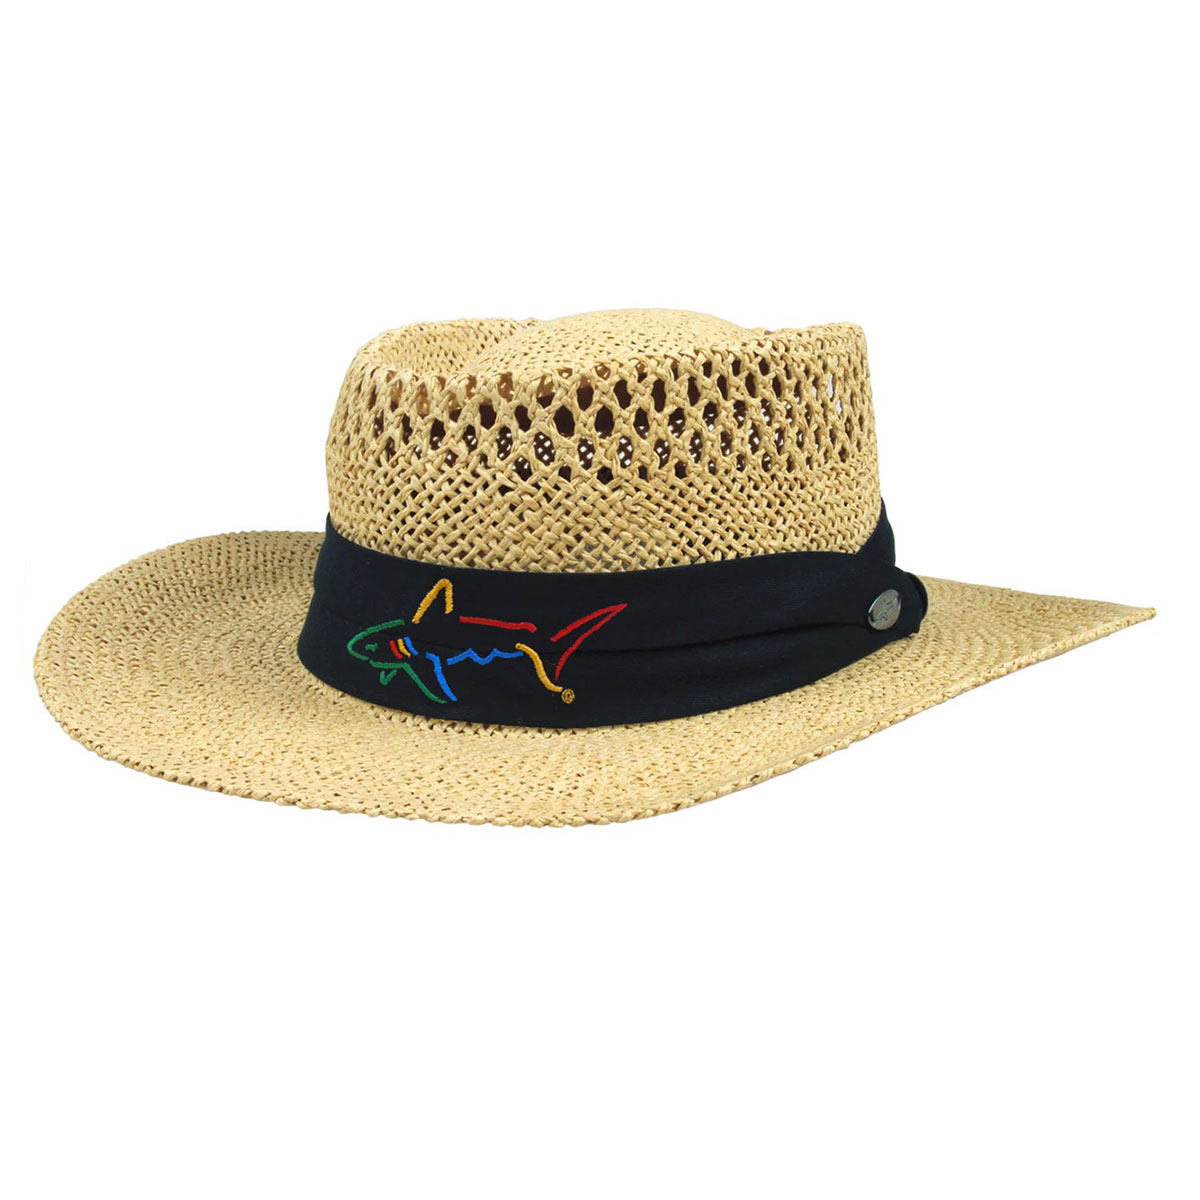 Greg Norman Men's Signature Straw Golf Hat from american golf